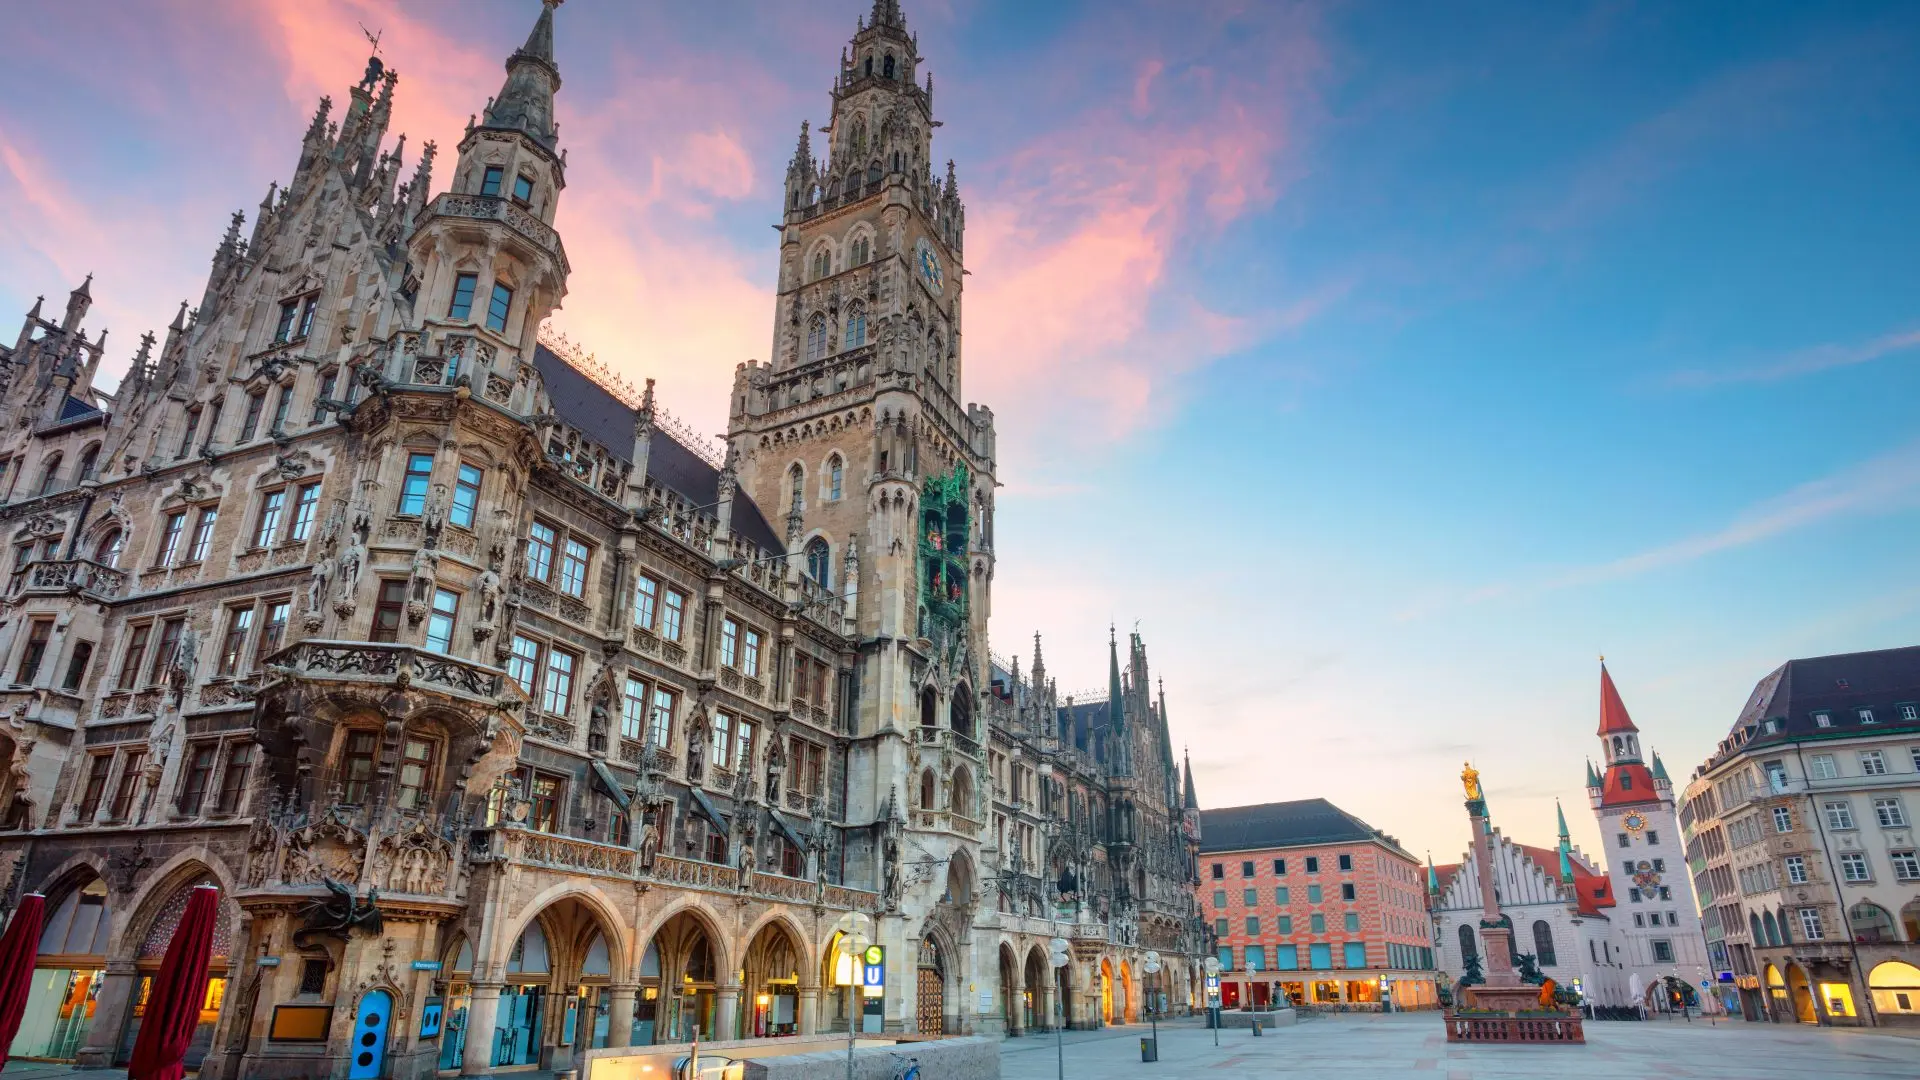 A large building in Munich, Germany with a stone design and beautiful sunset behind.